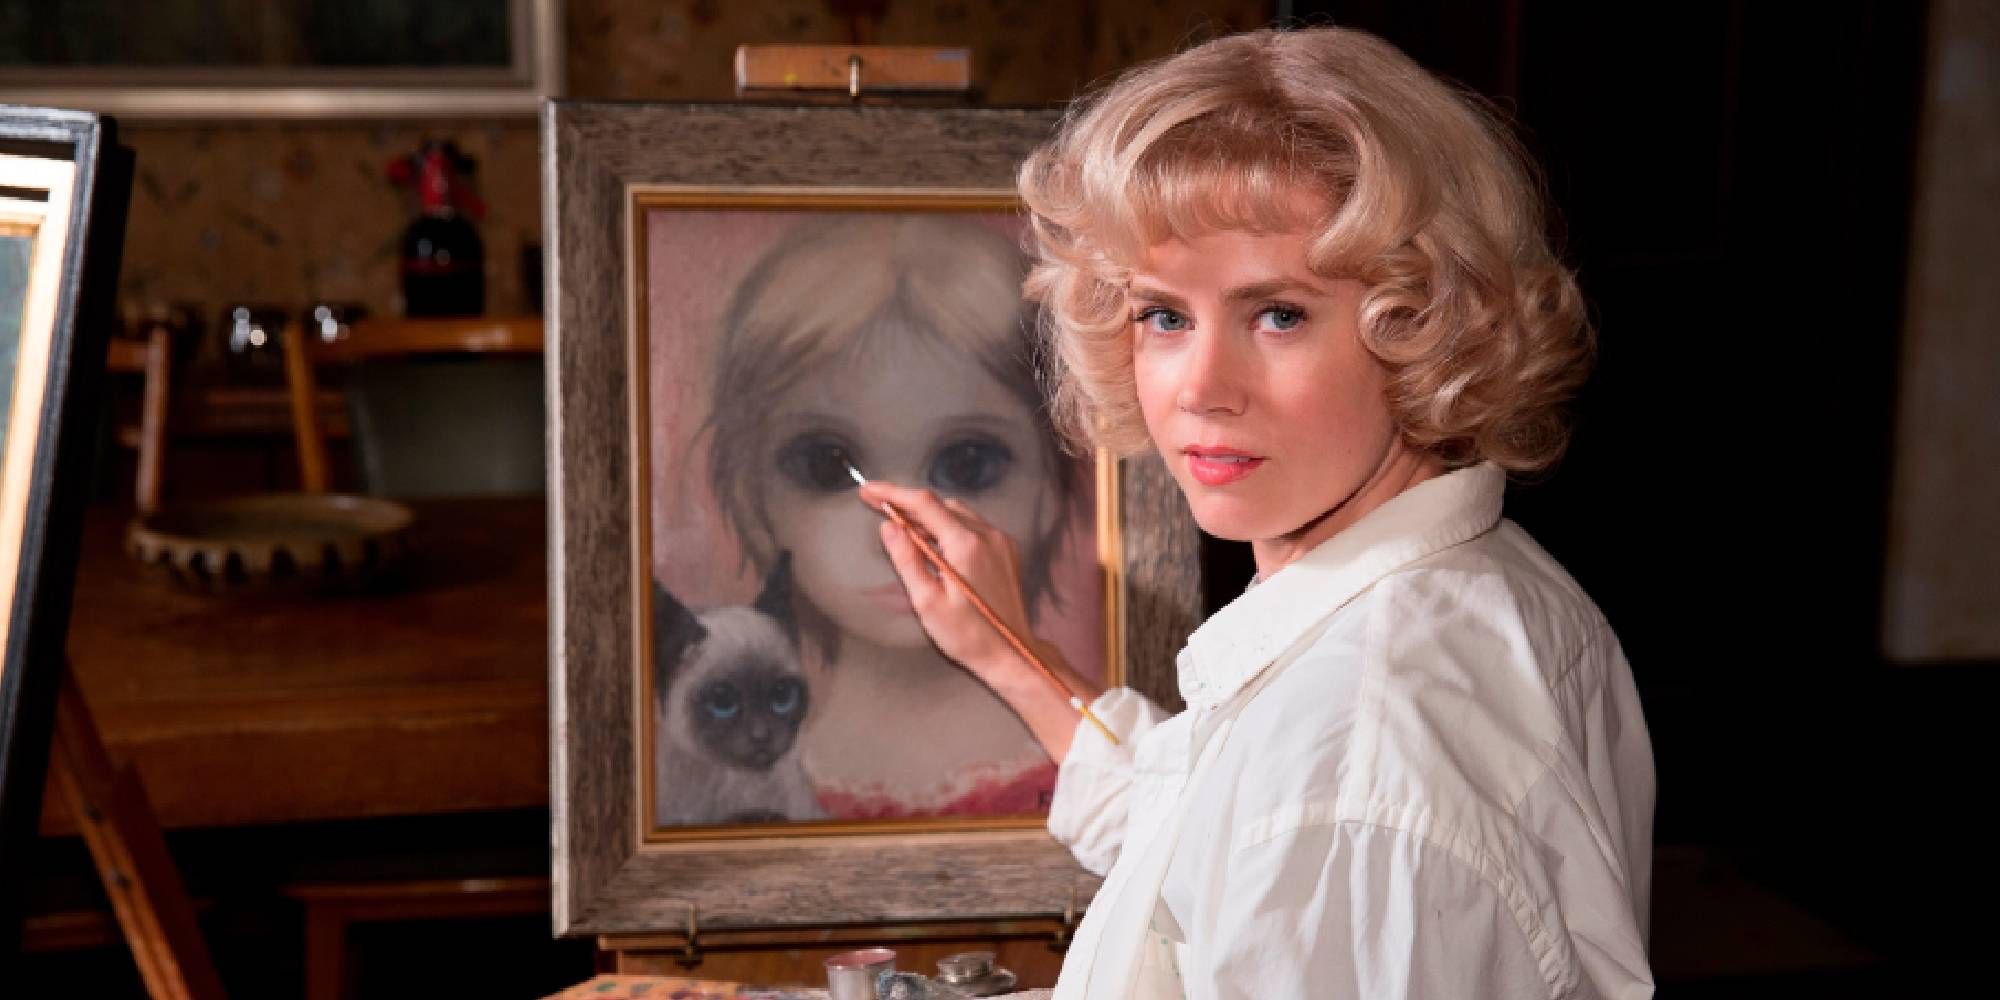 Amy Adams as Margaret Keane painting while turning around to face the camera in Big Eyes.